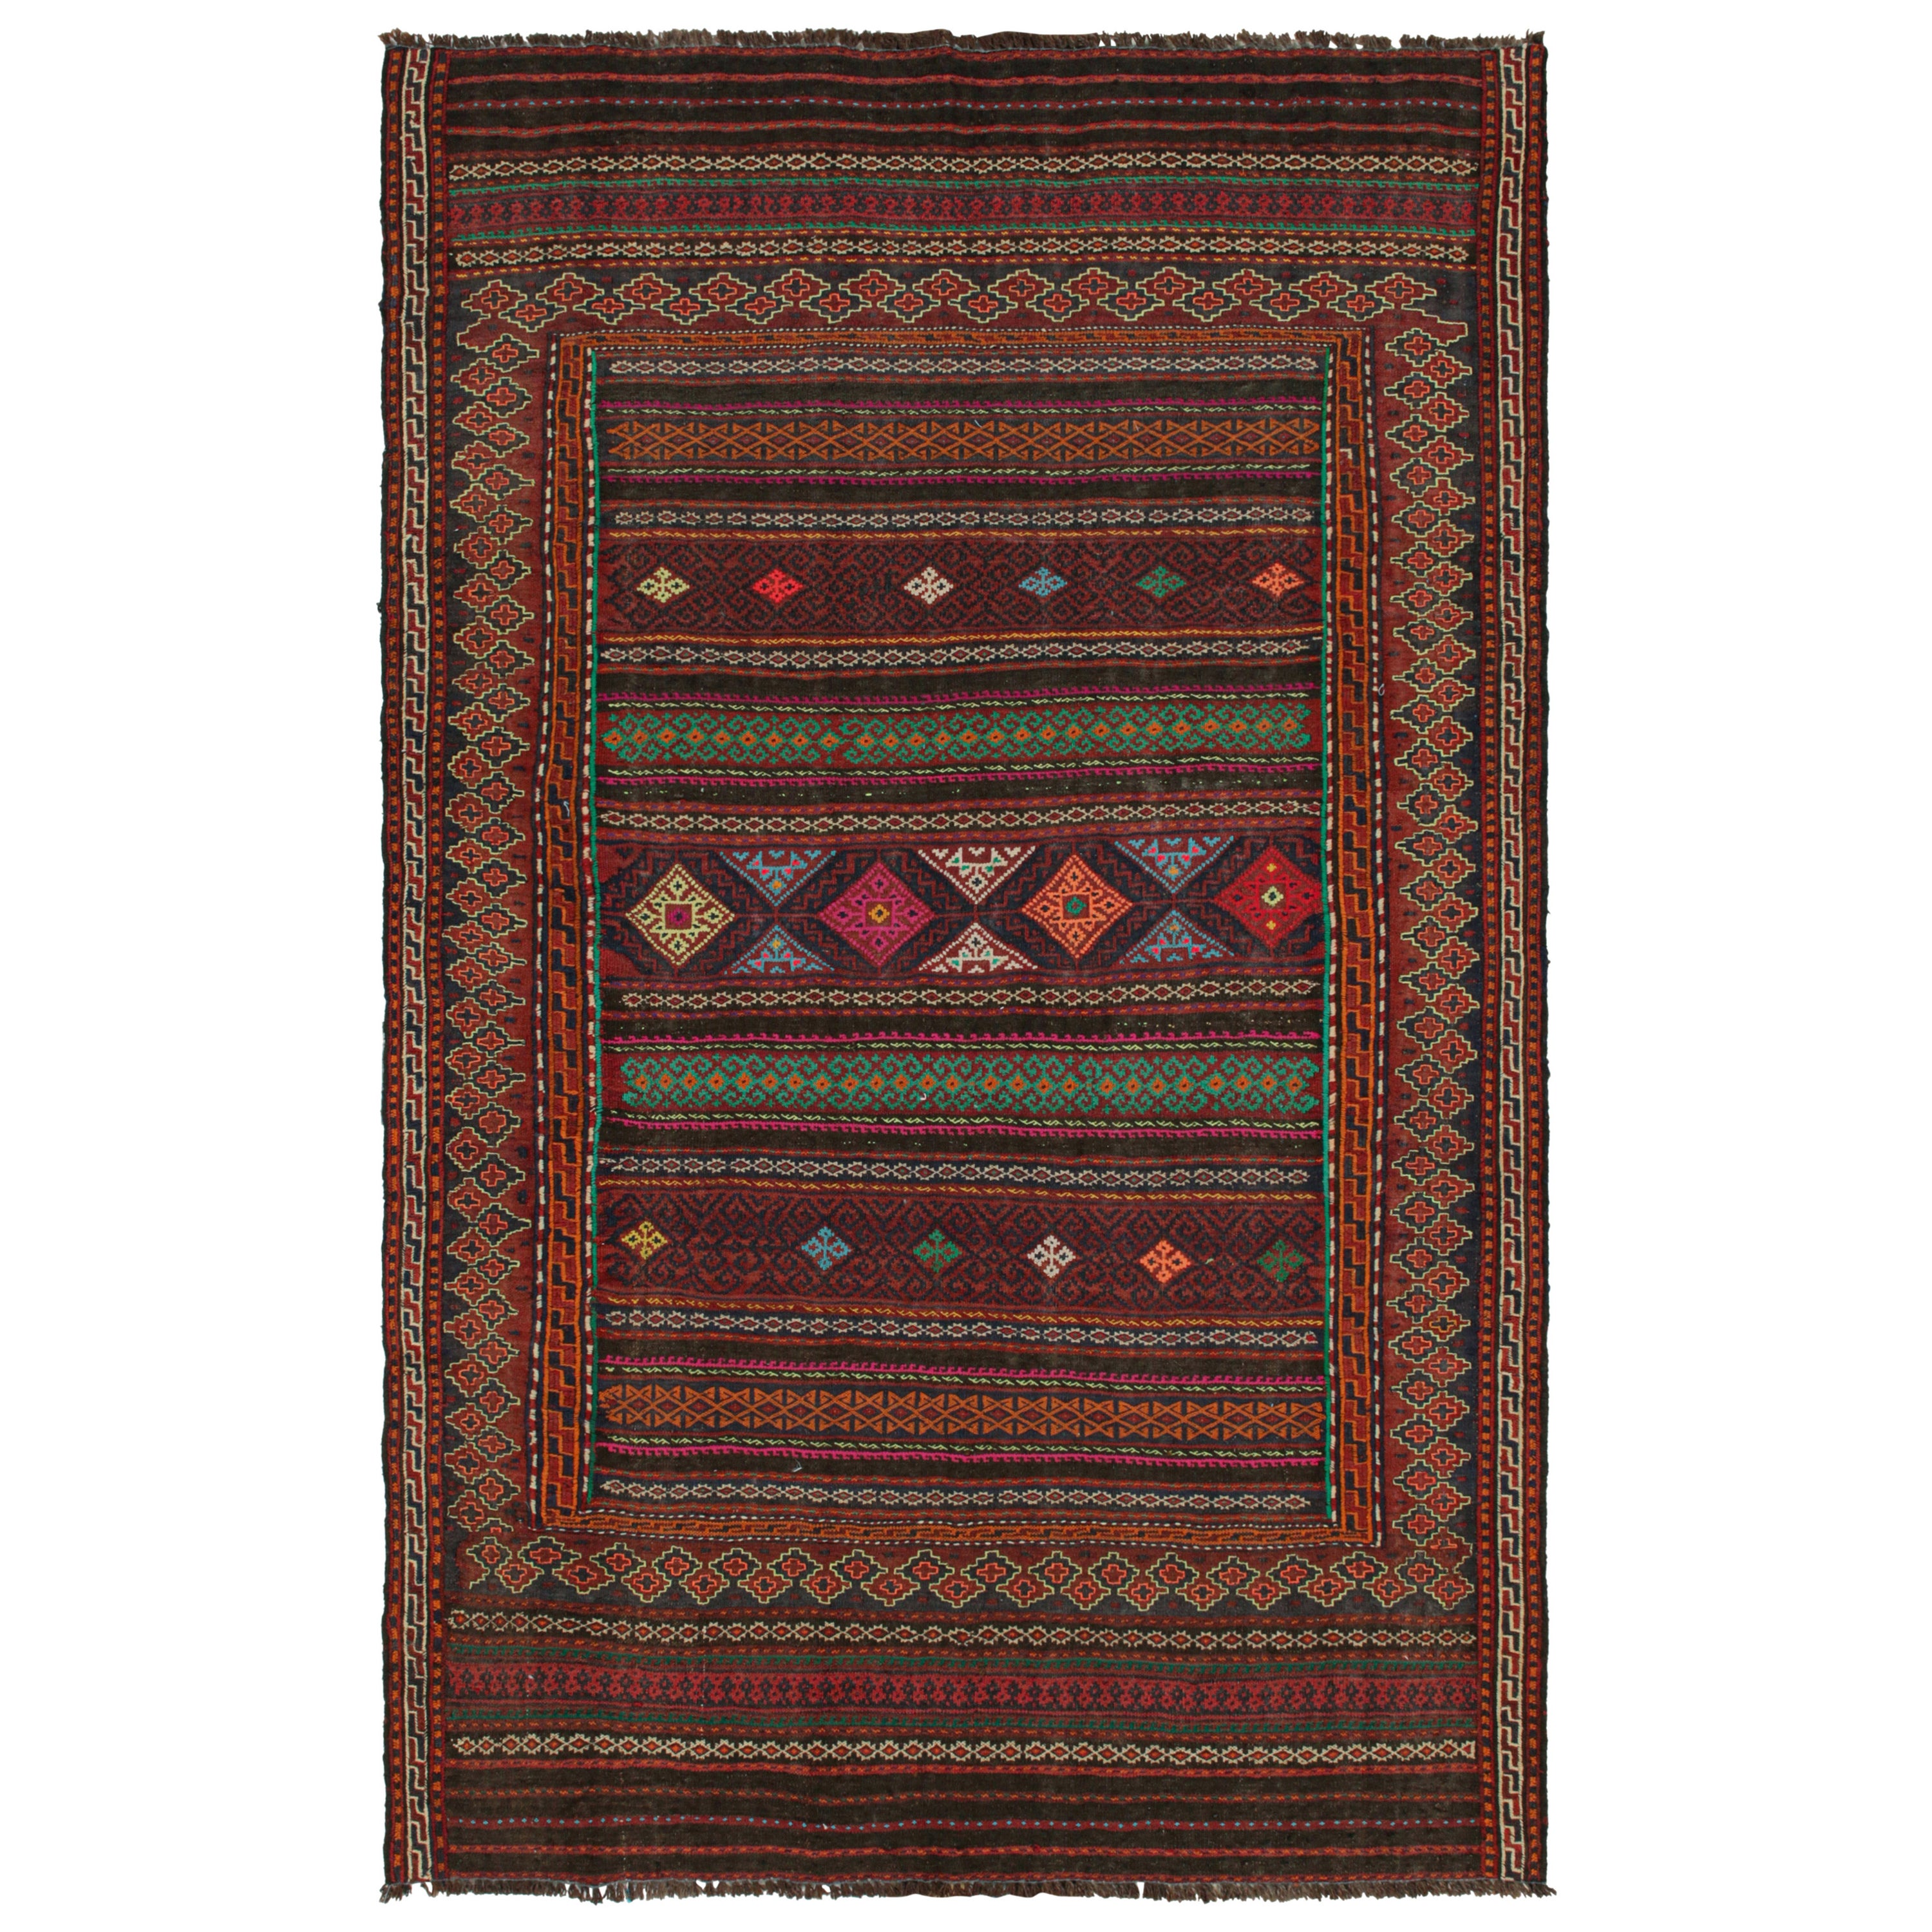 Vintage Baluch Tribal Kilim in Brown with Geometric Patterns, from Rug & Kilim For Sale